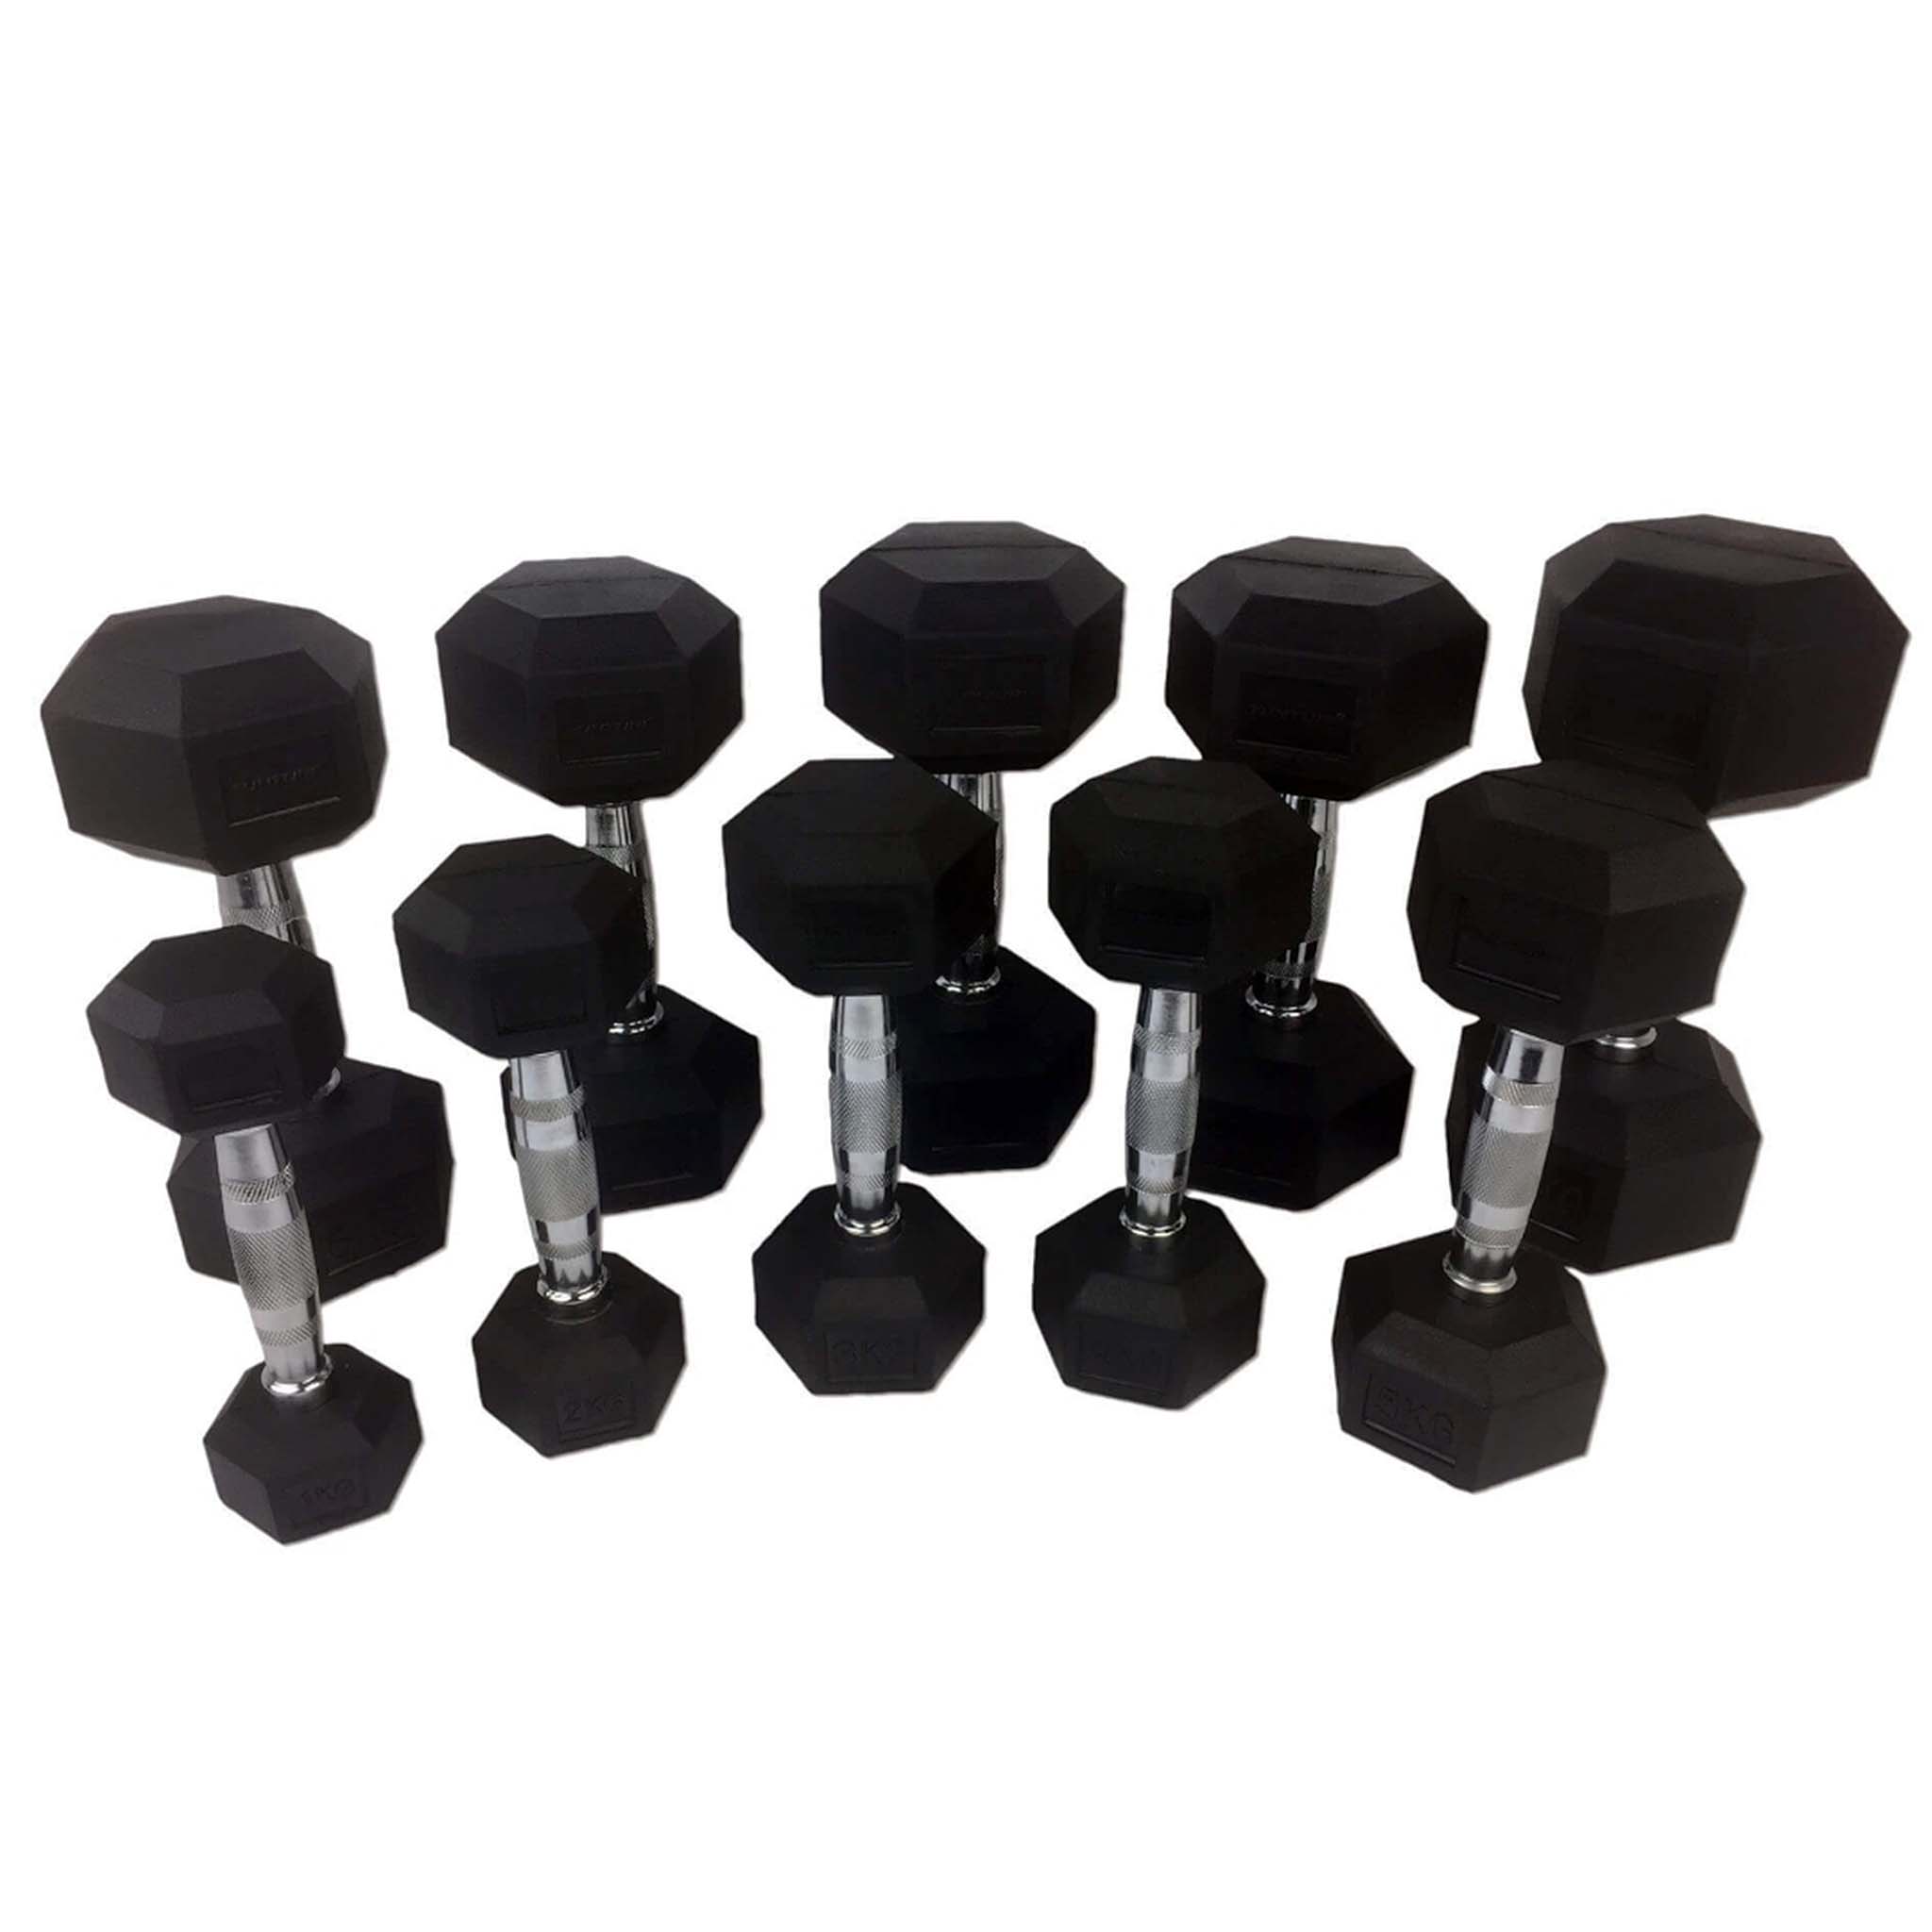 5kg to 25kg Rubber Hex Dumbbell Package (9 Pairs) | INSOURCE